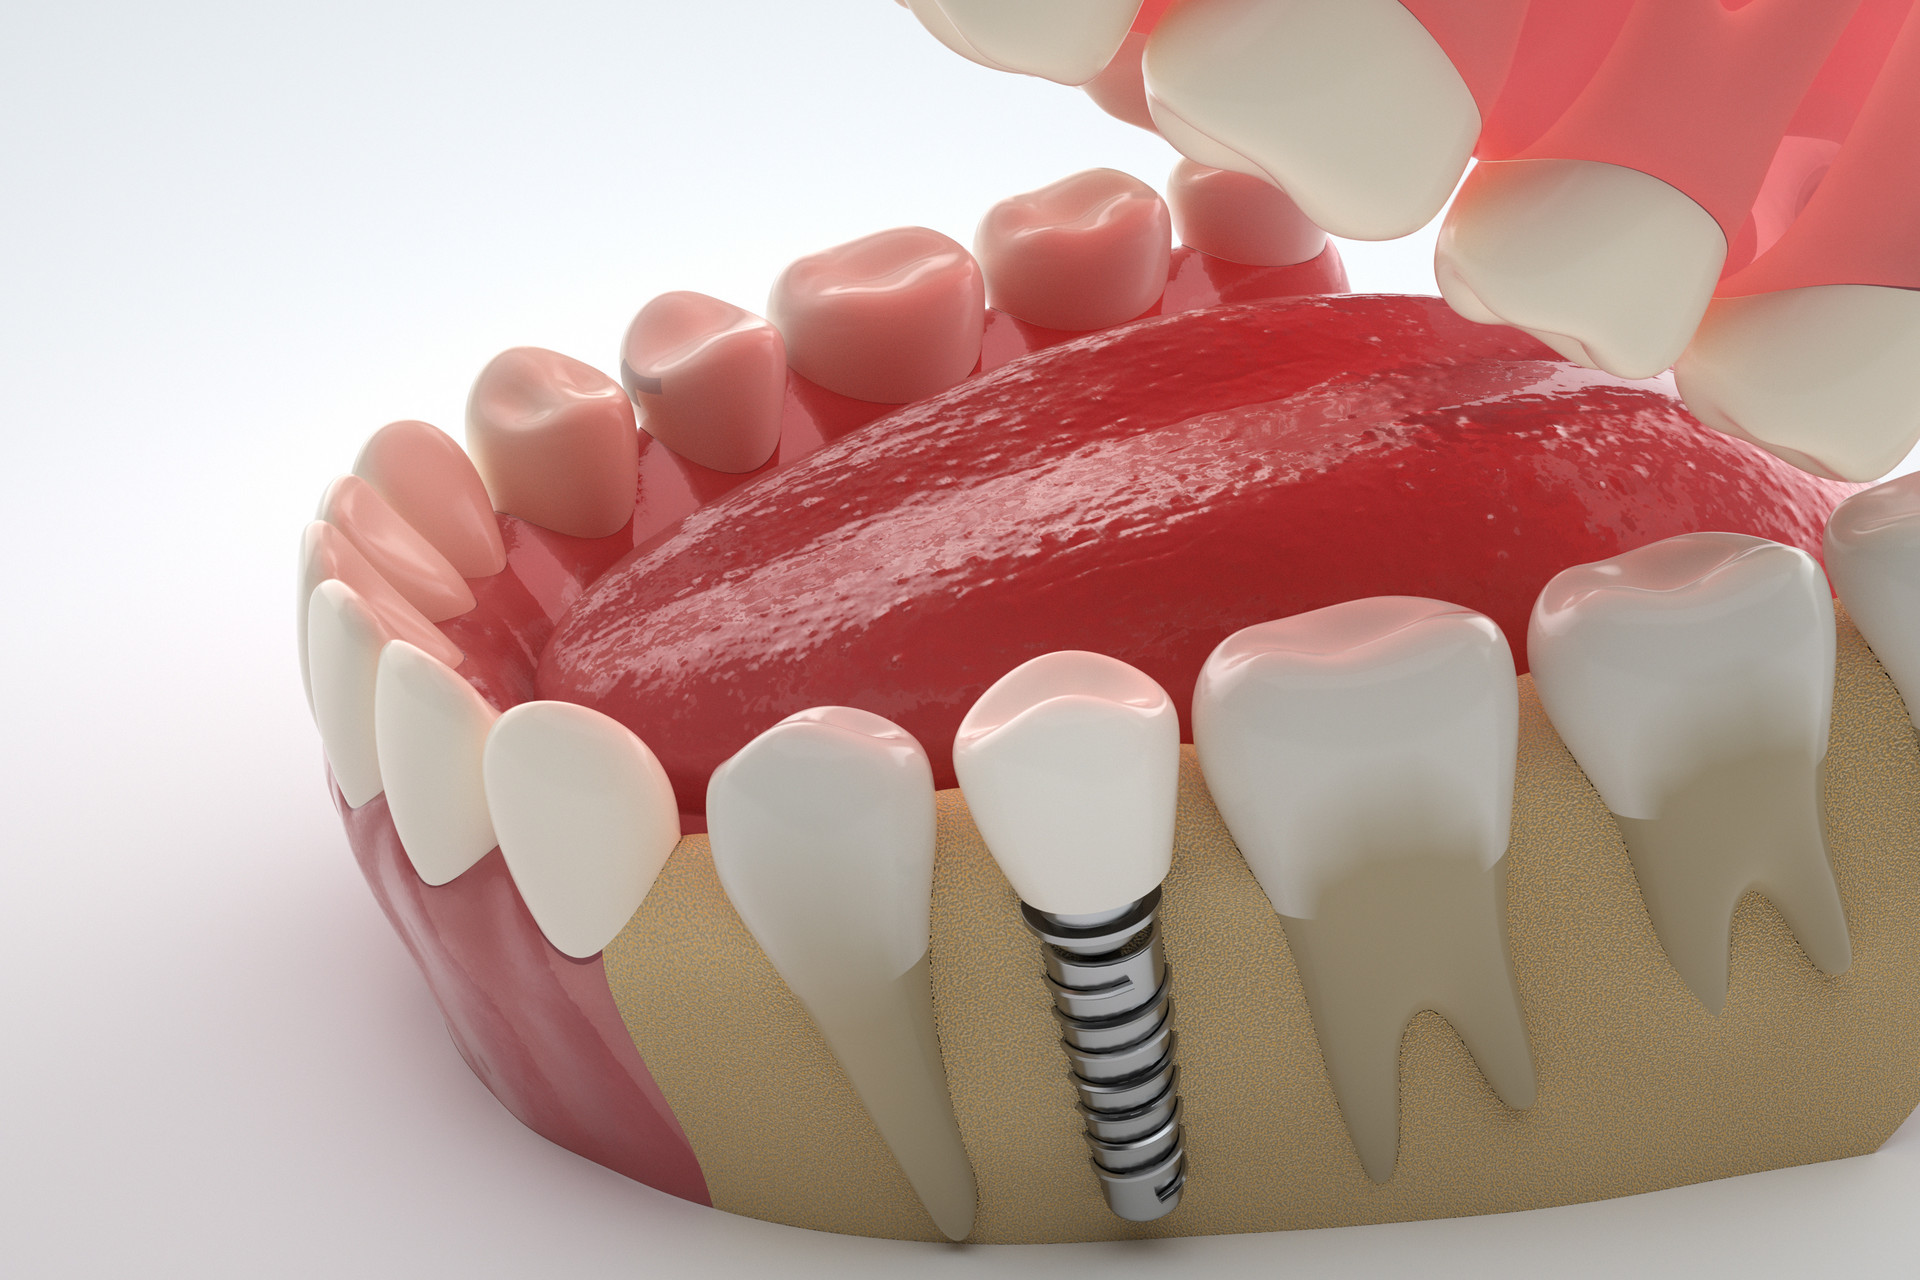 Clin Oral Implants Res：<font color="red">种植</font>体<font color="red">冠</font>螺丝固位vs.粘结固位5年结局对比